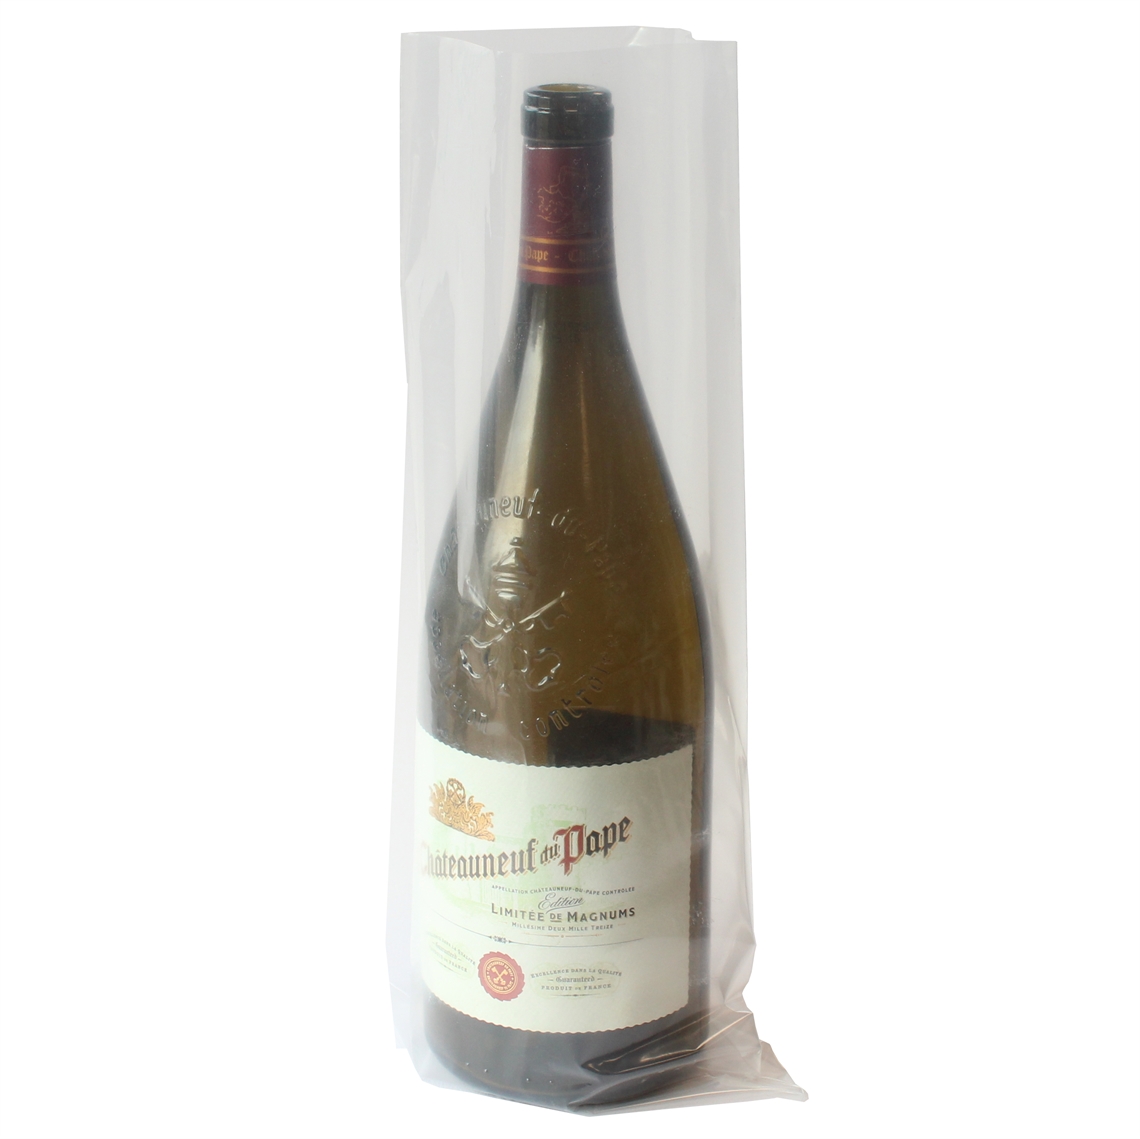 View more wine bags from our Wine Bottle Cellar Sleeves range